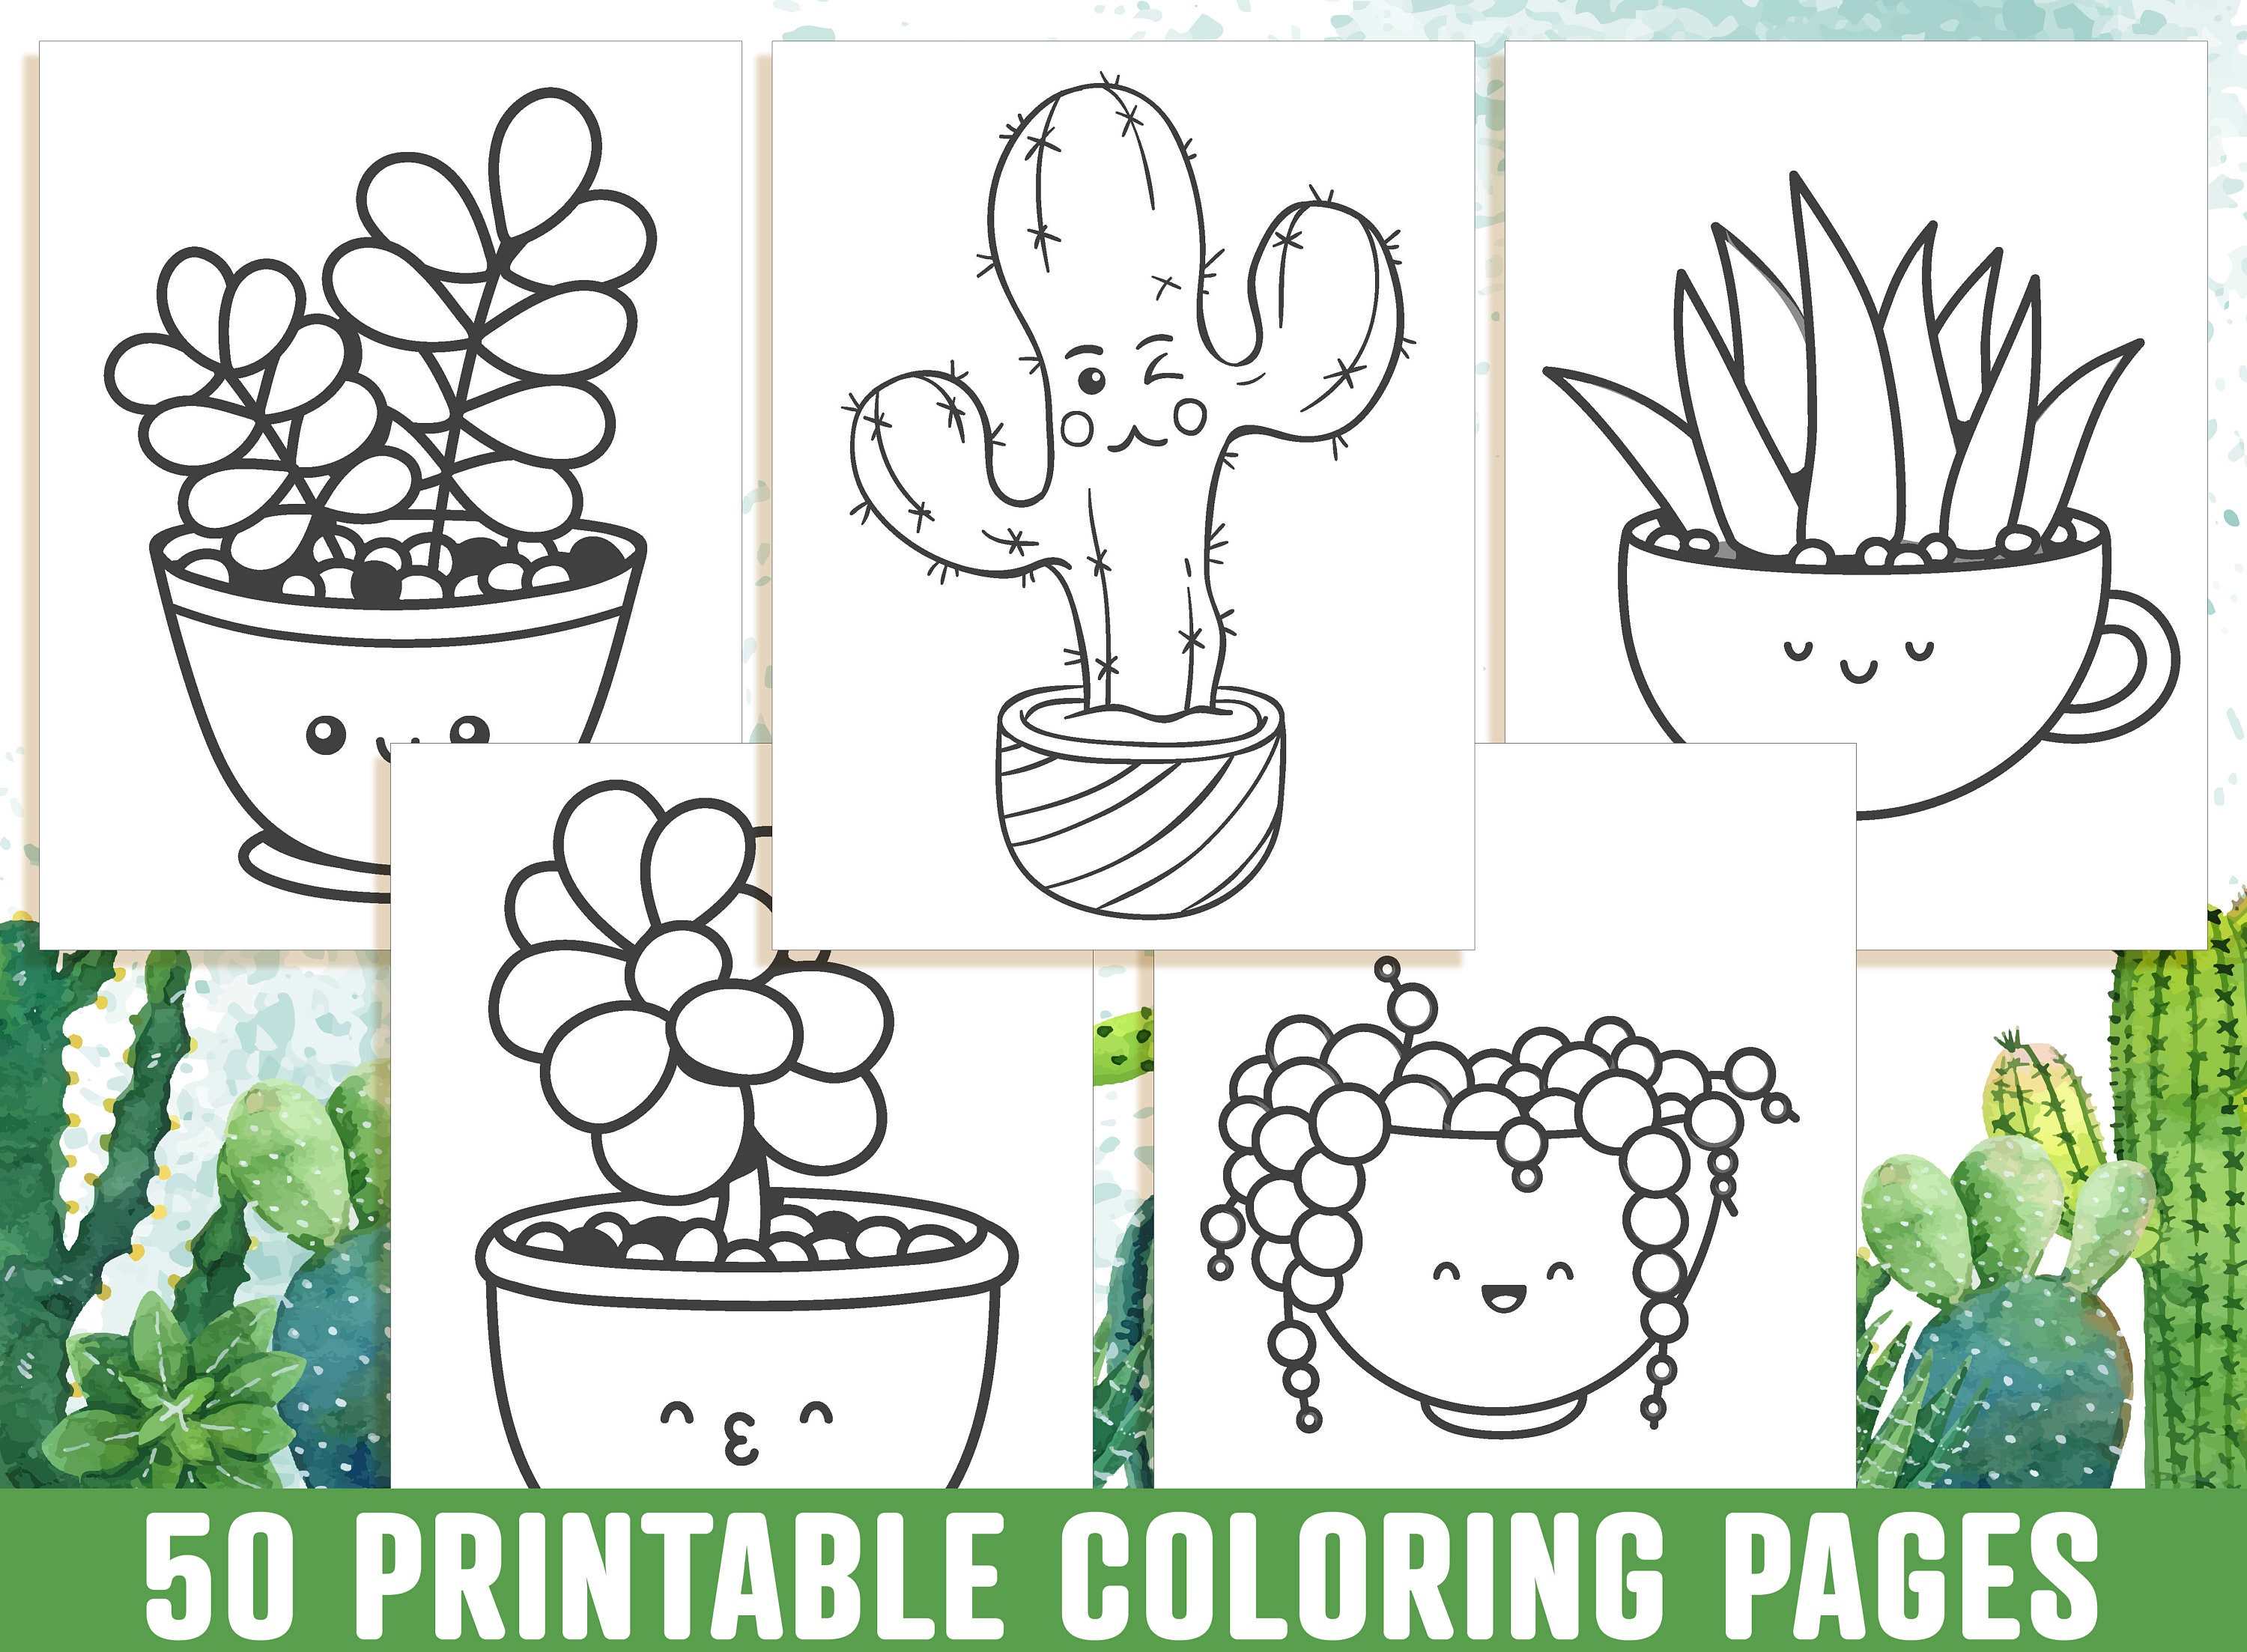 Cactus Coloring Pages A Cute Coloring Book with 50 Adorable | Etsy